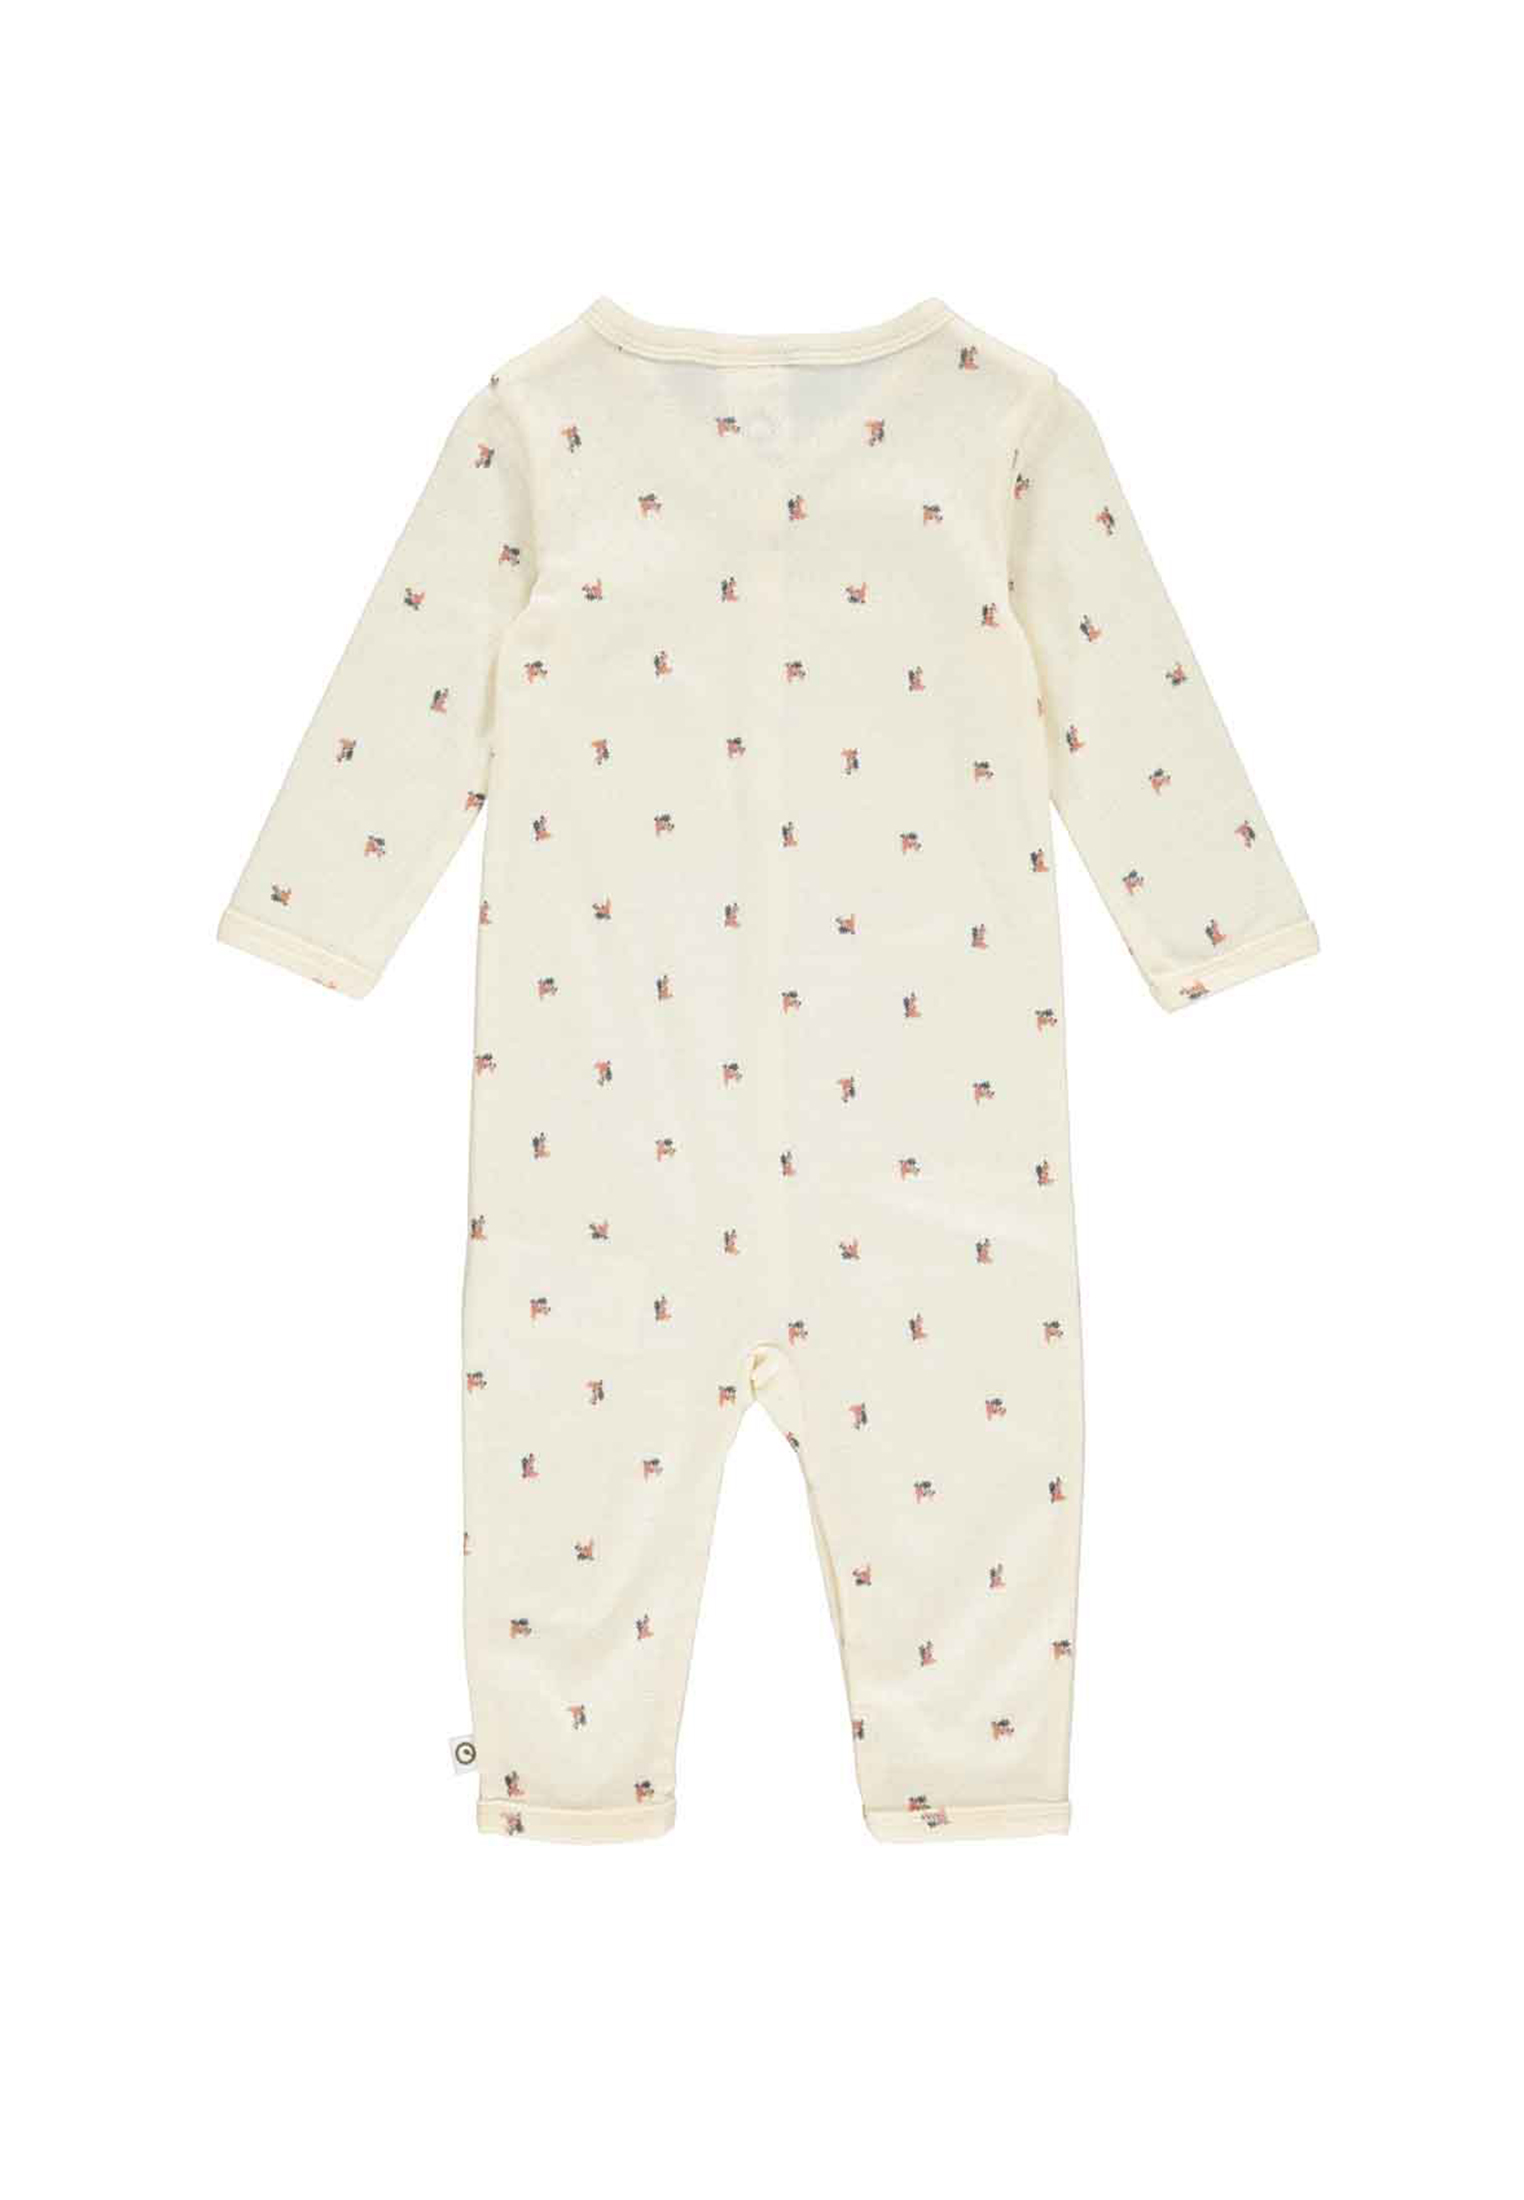 MAMA.LICIOUS Baby one-piece suit -Buttercream/Rose - 1584061300